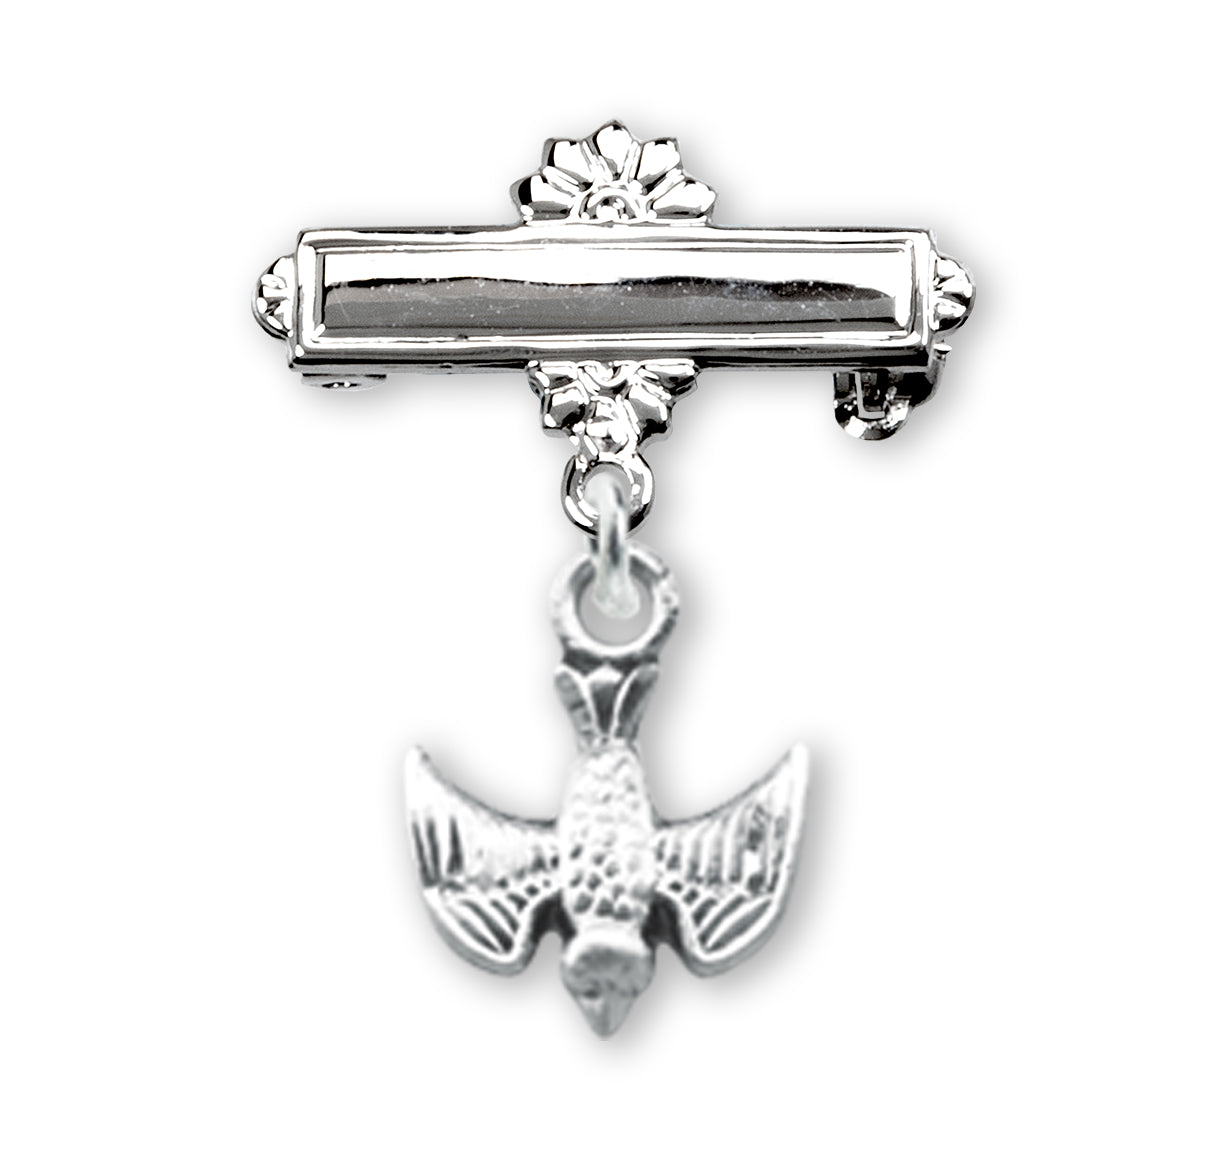 Sterling Silver Baby Holy Spirit Medal on a Bar Pin